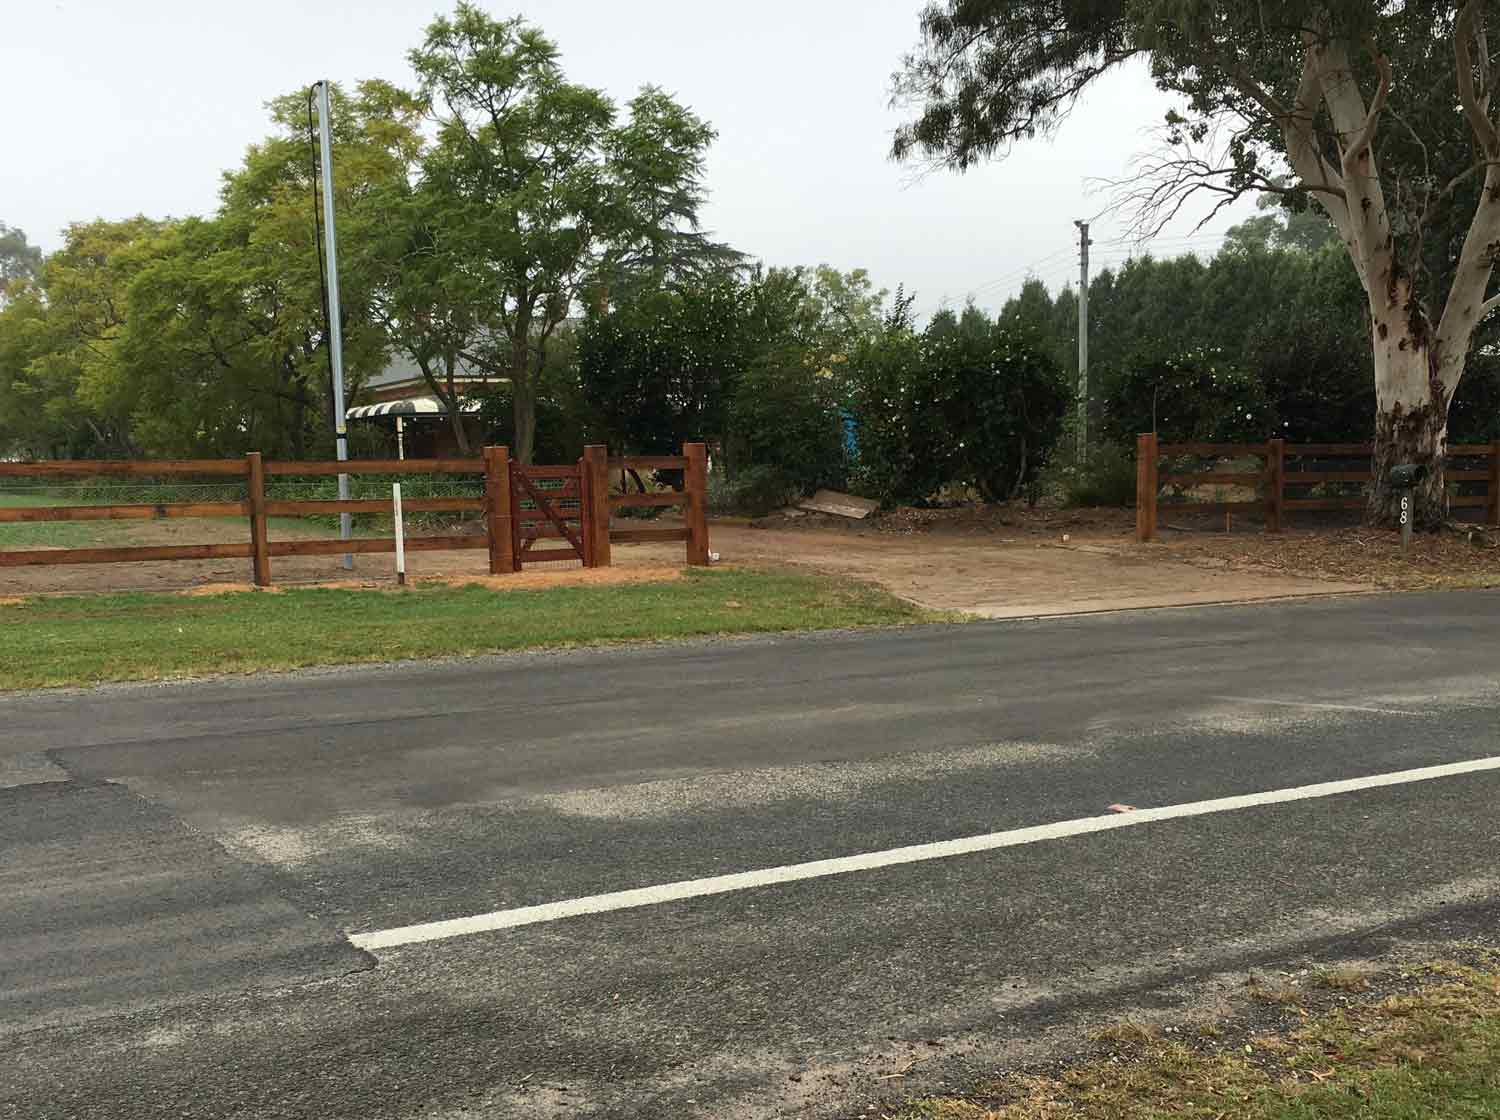 3 post and rail fencing